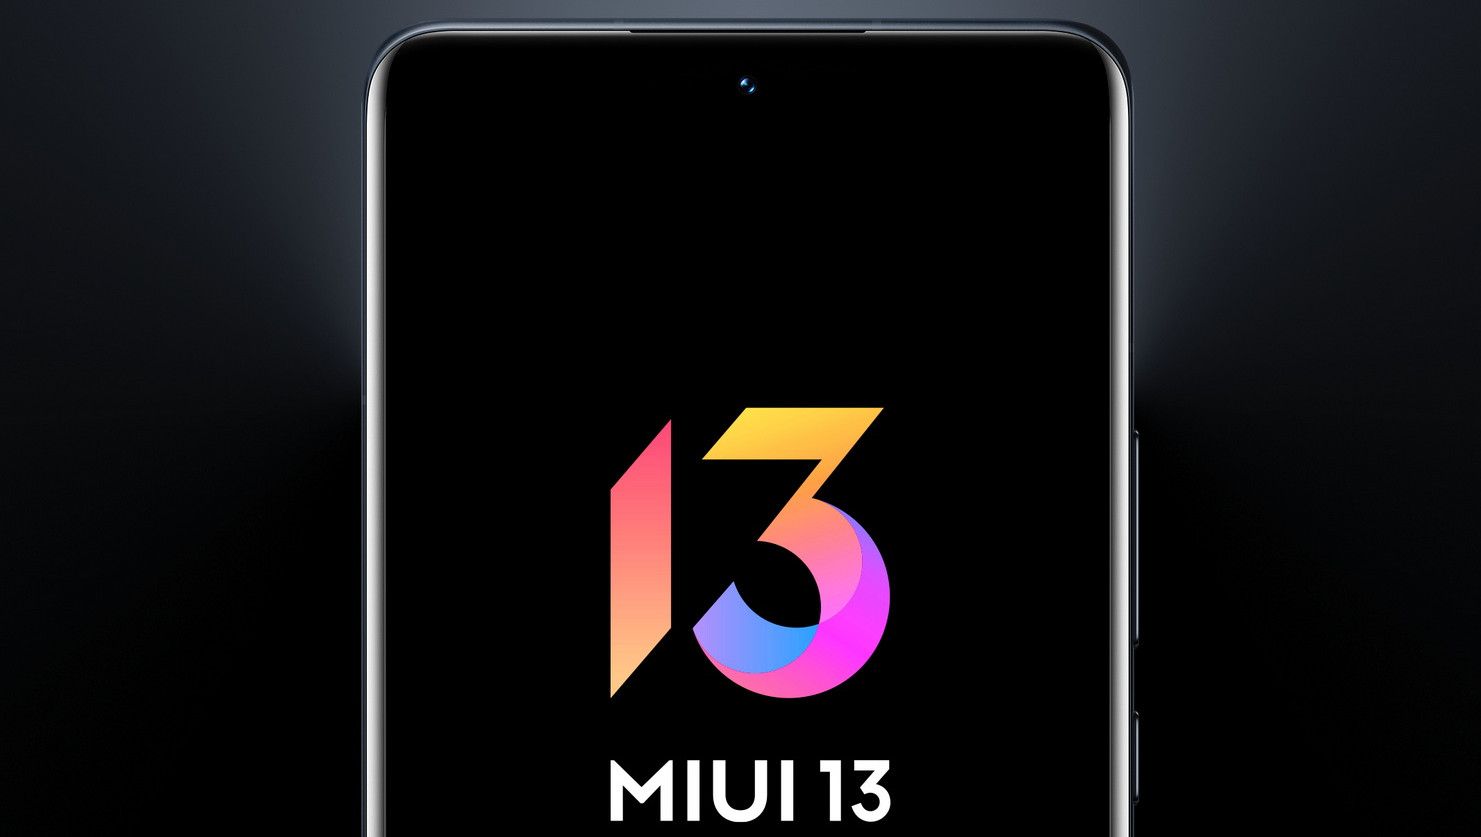 Xiaomi starts testing MIUI 13 on almost 50 devices in the global market: which models are on the list and how to participate